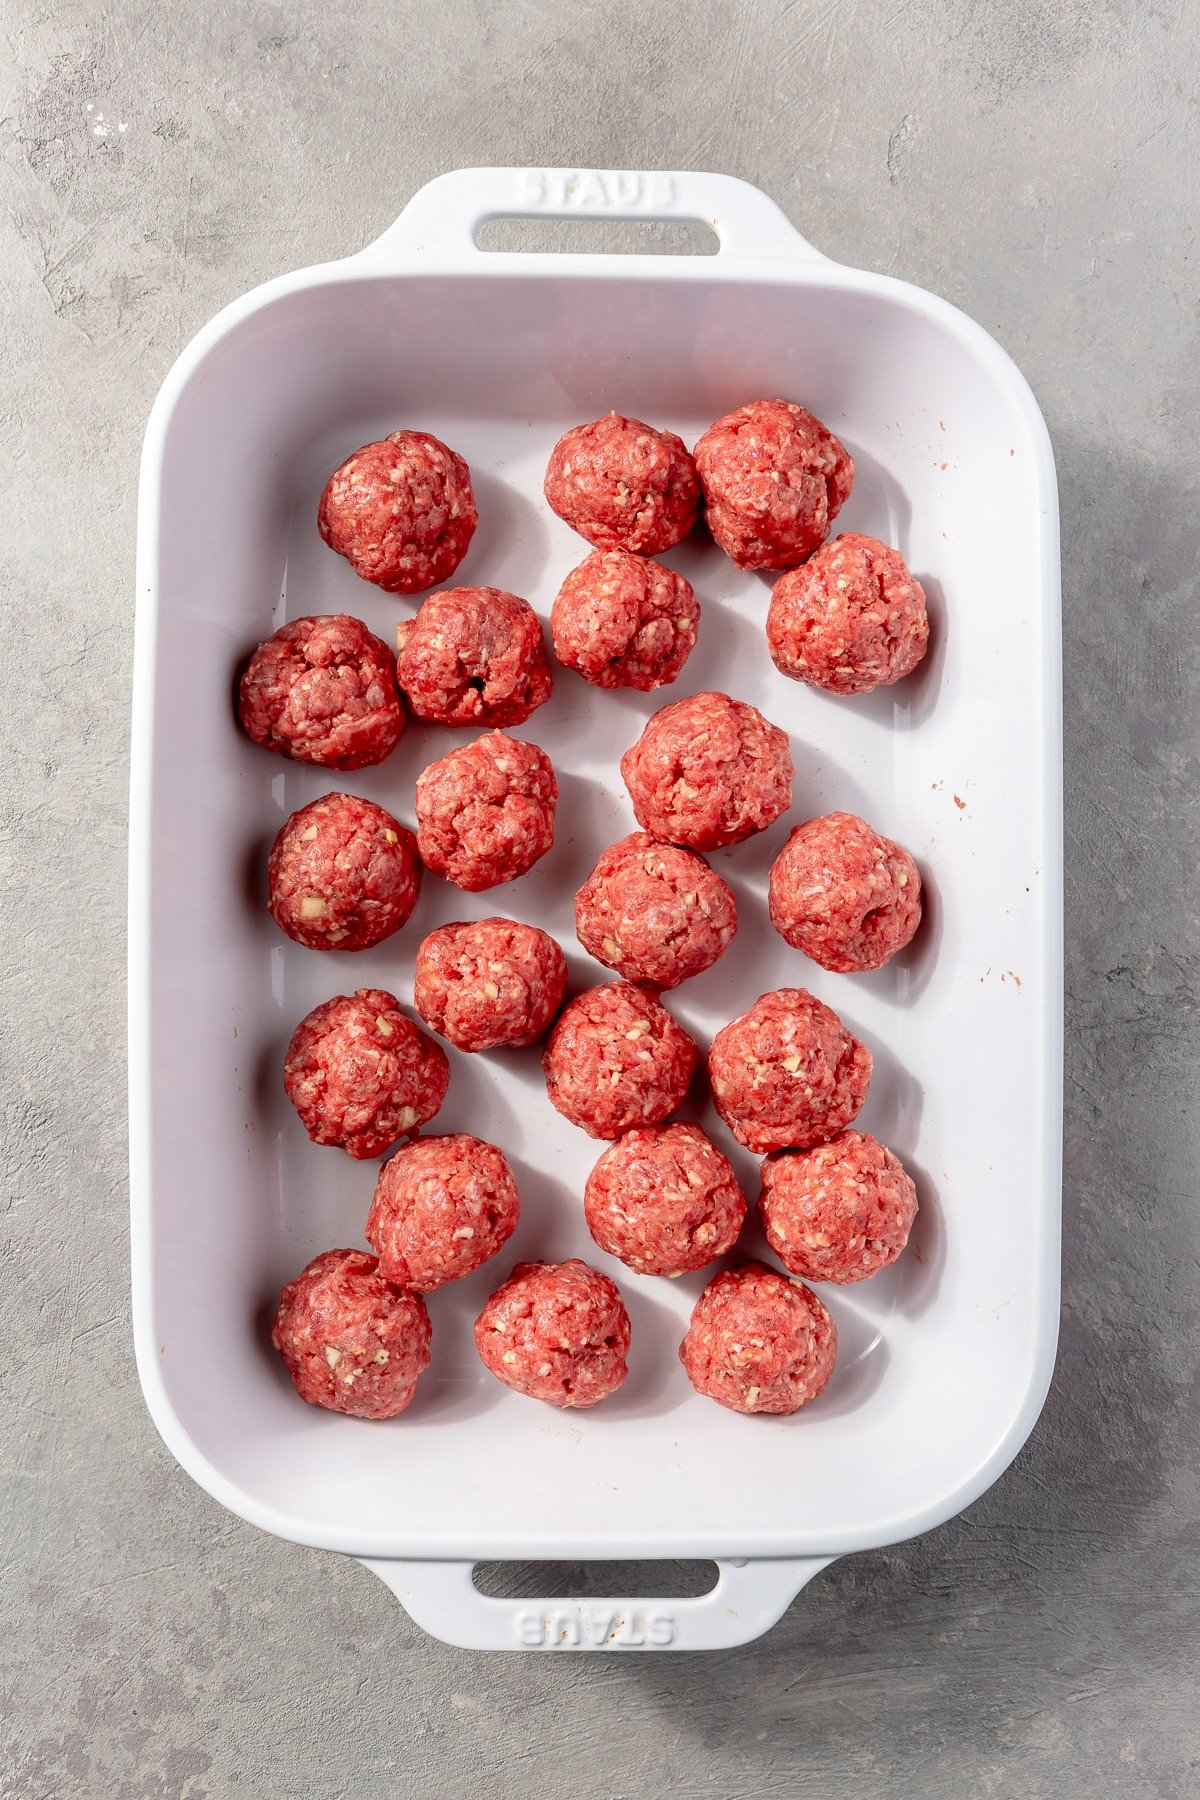 The ground beef mixture has been rolled into meatballs of which sit in a white baking dish.